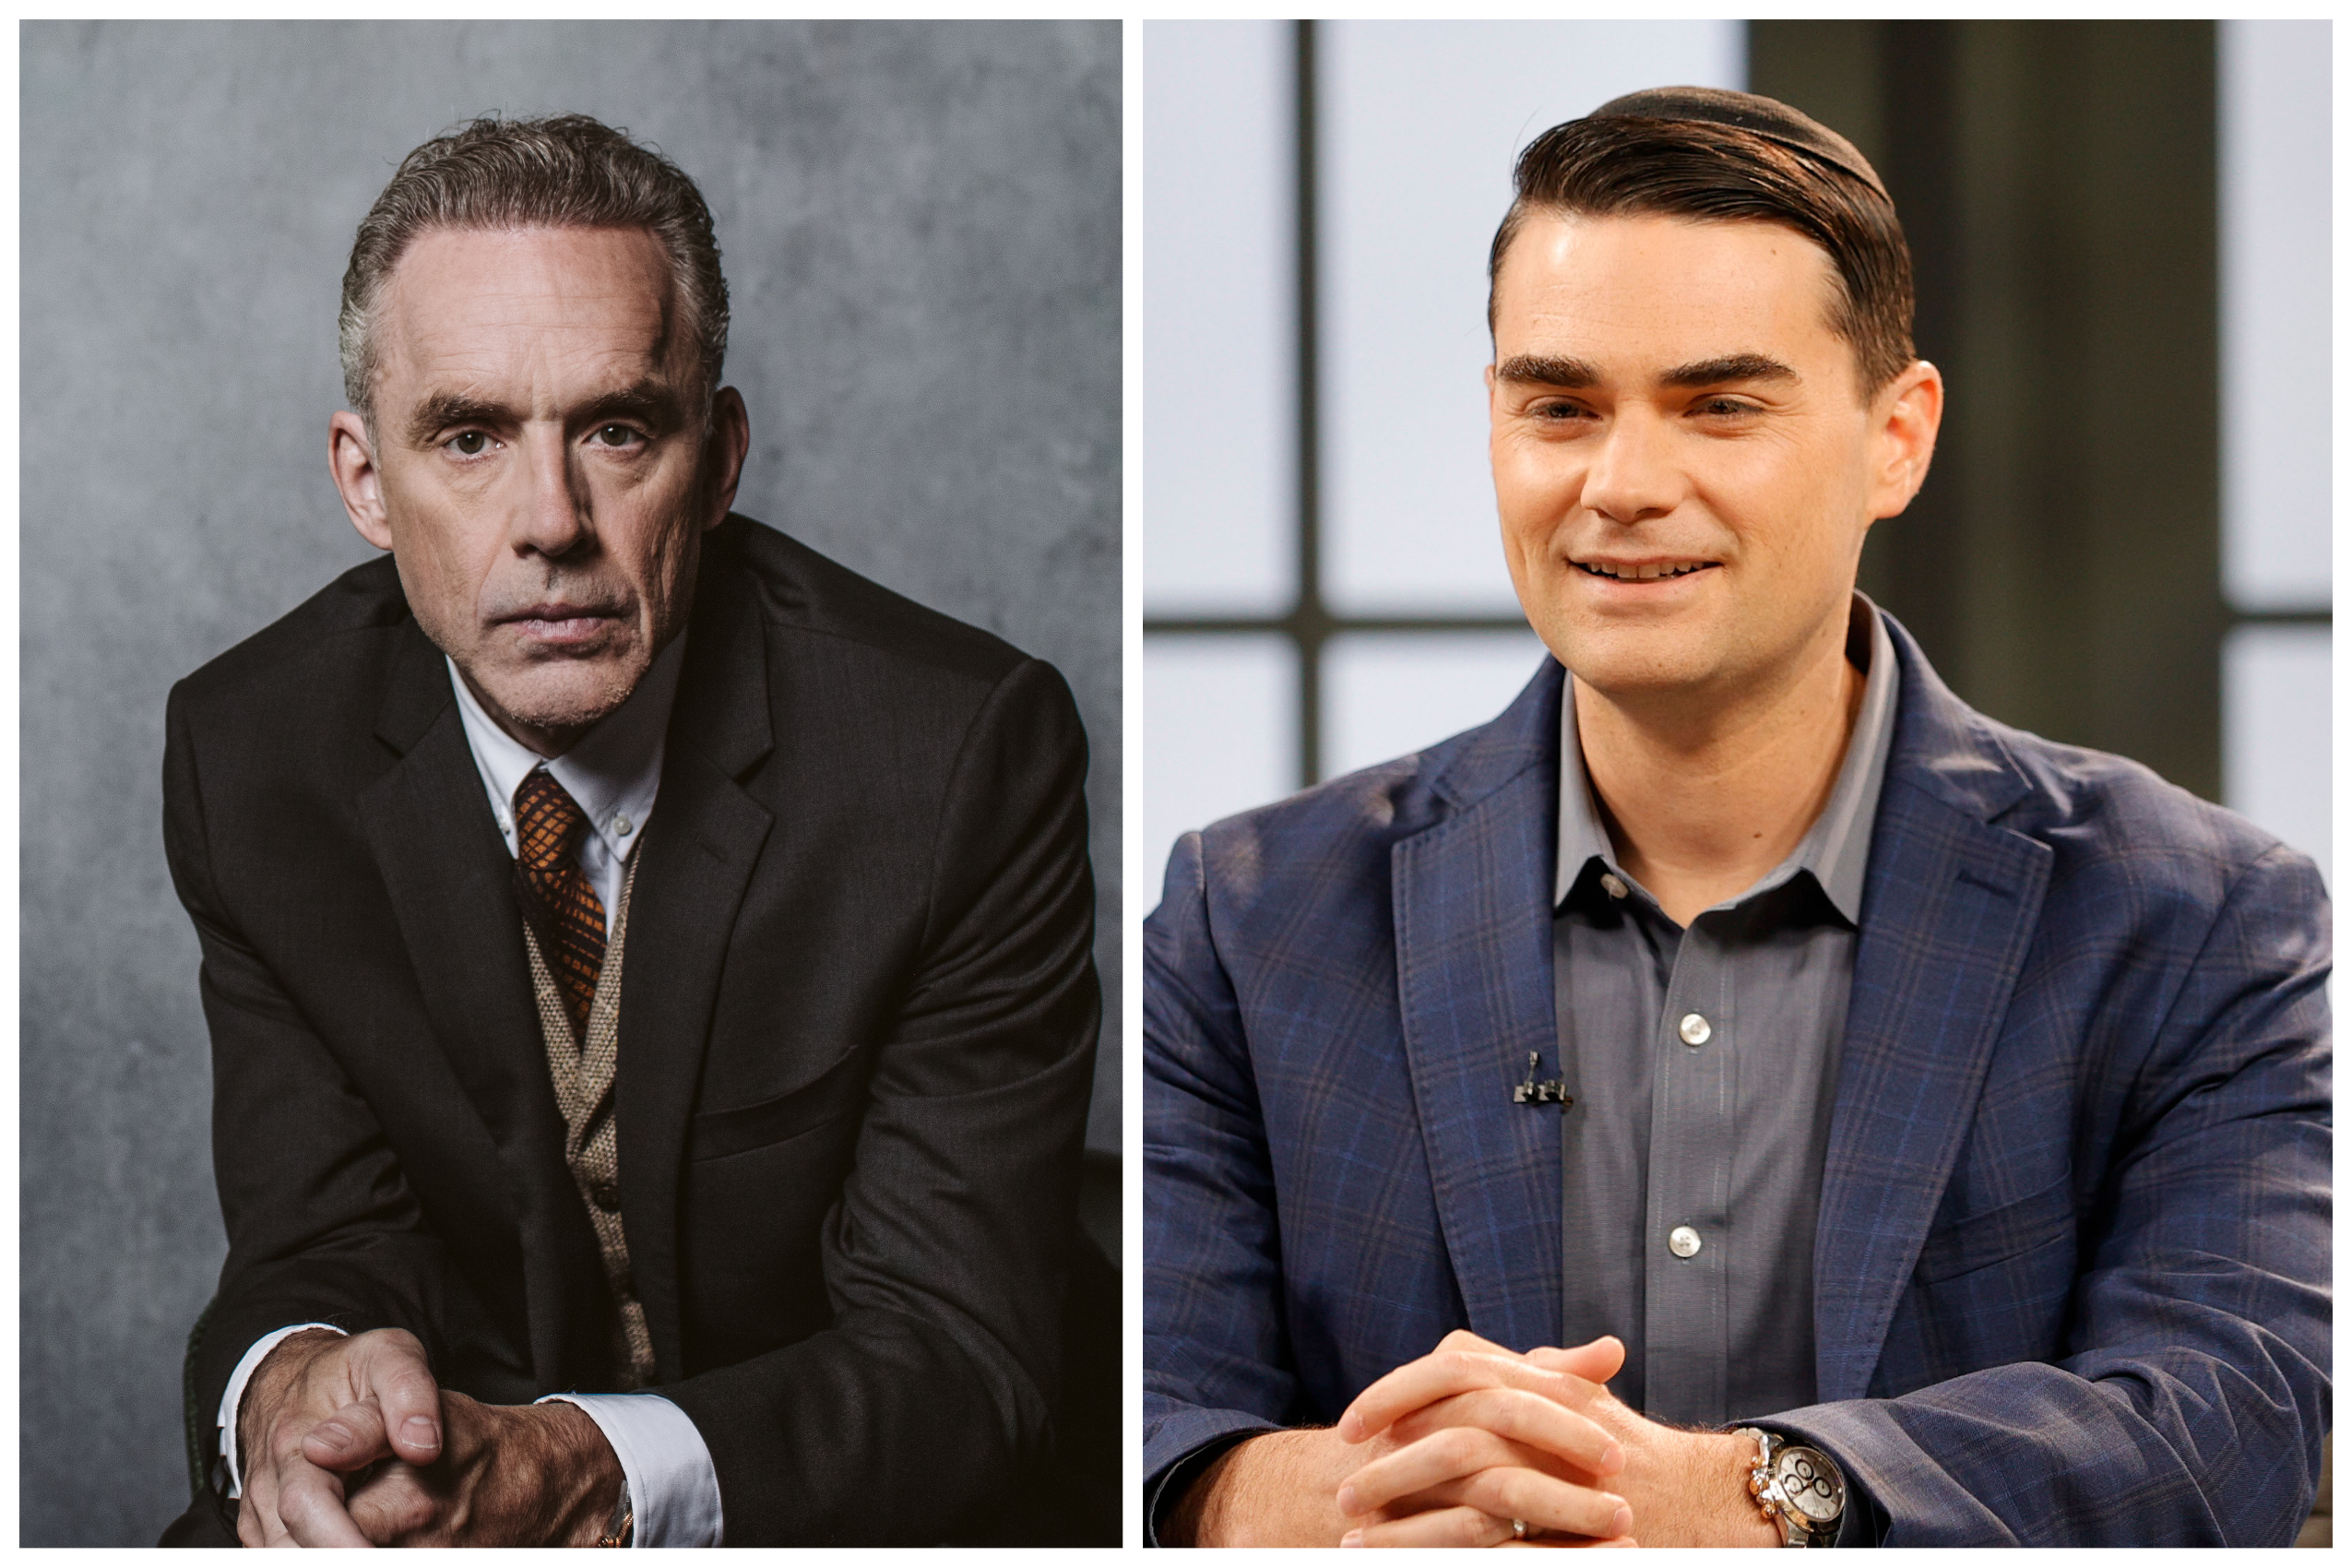 ‘Movement Toward A Valued Goal’: Ben Shapiro, Dr. Jordan B. Peterson Talk Vision, Prayer, And Using The Lord’s Name In Vain In ‘Exodus’